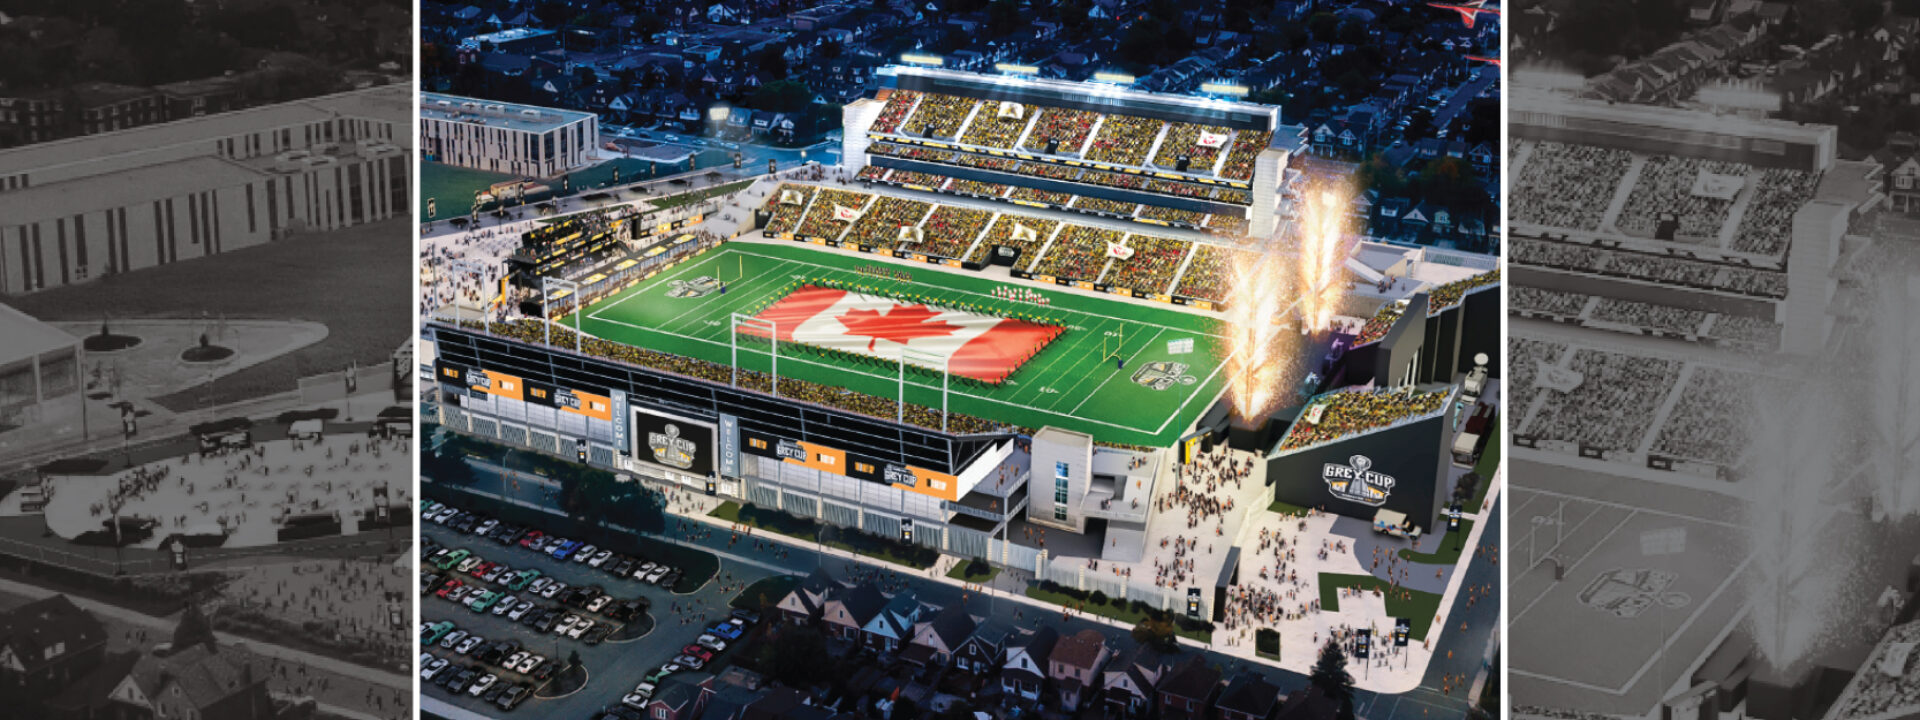 FirstOntario Centre reno could keep Rock out of Hamilton home for